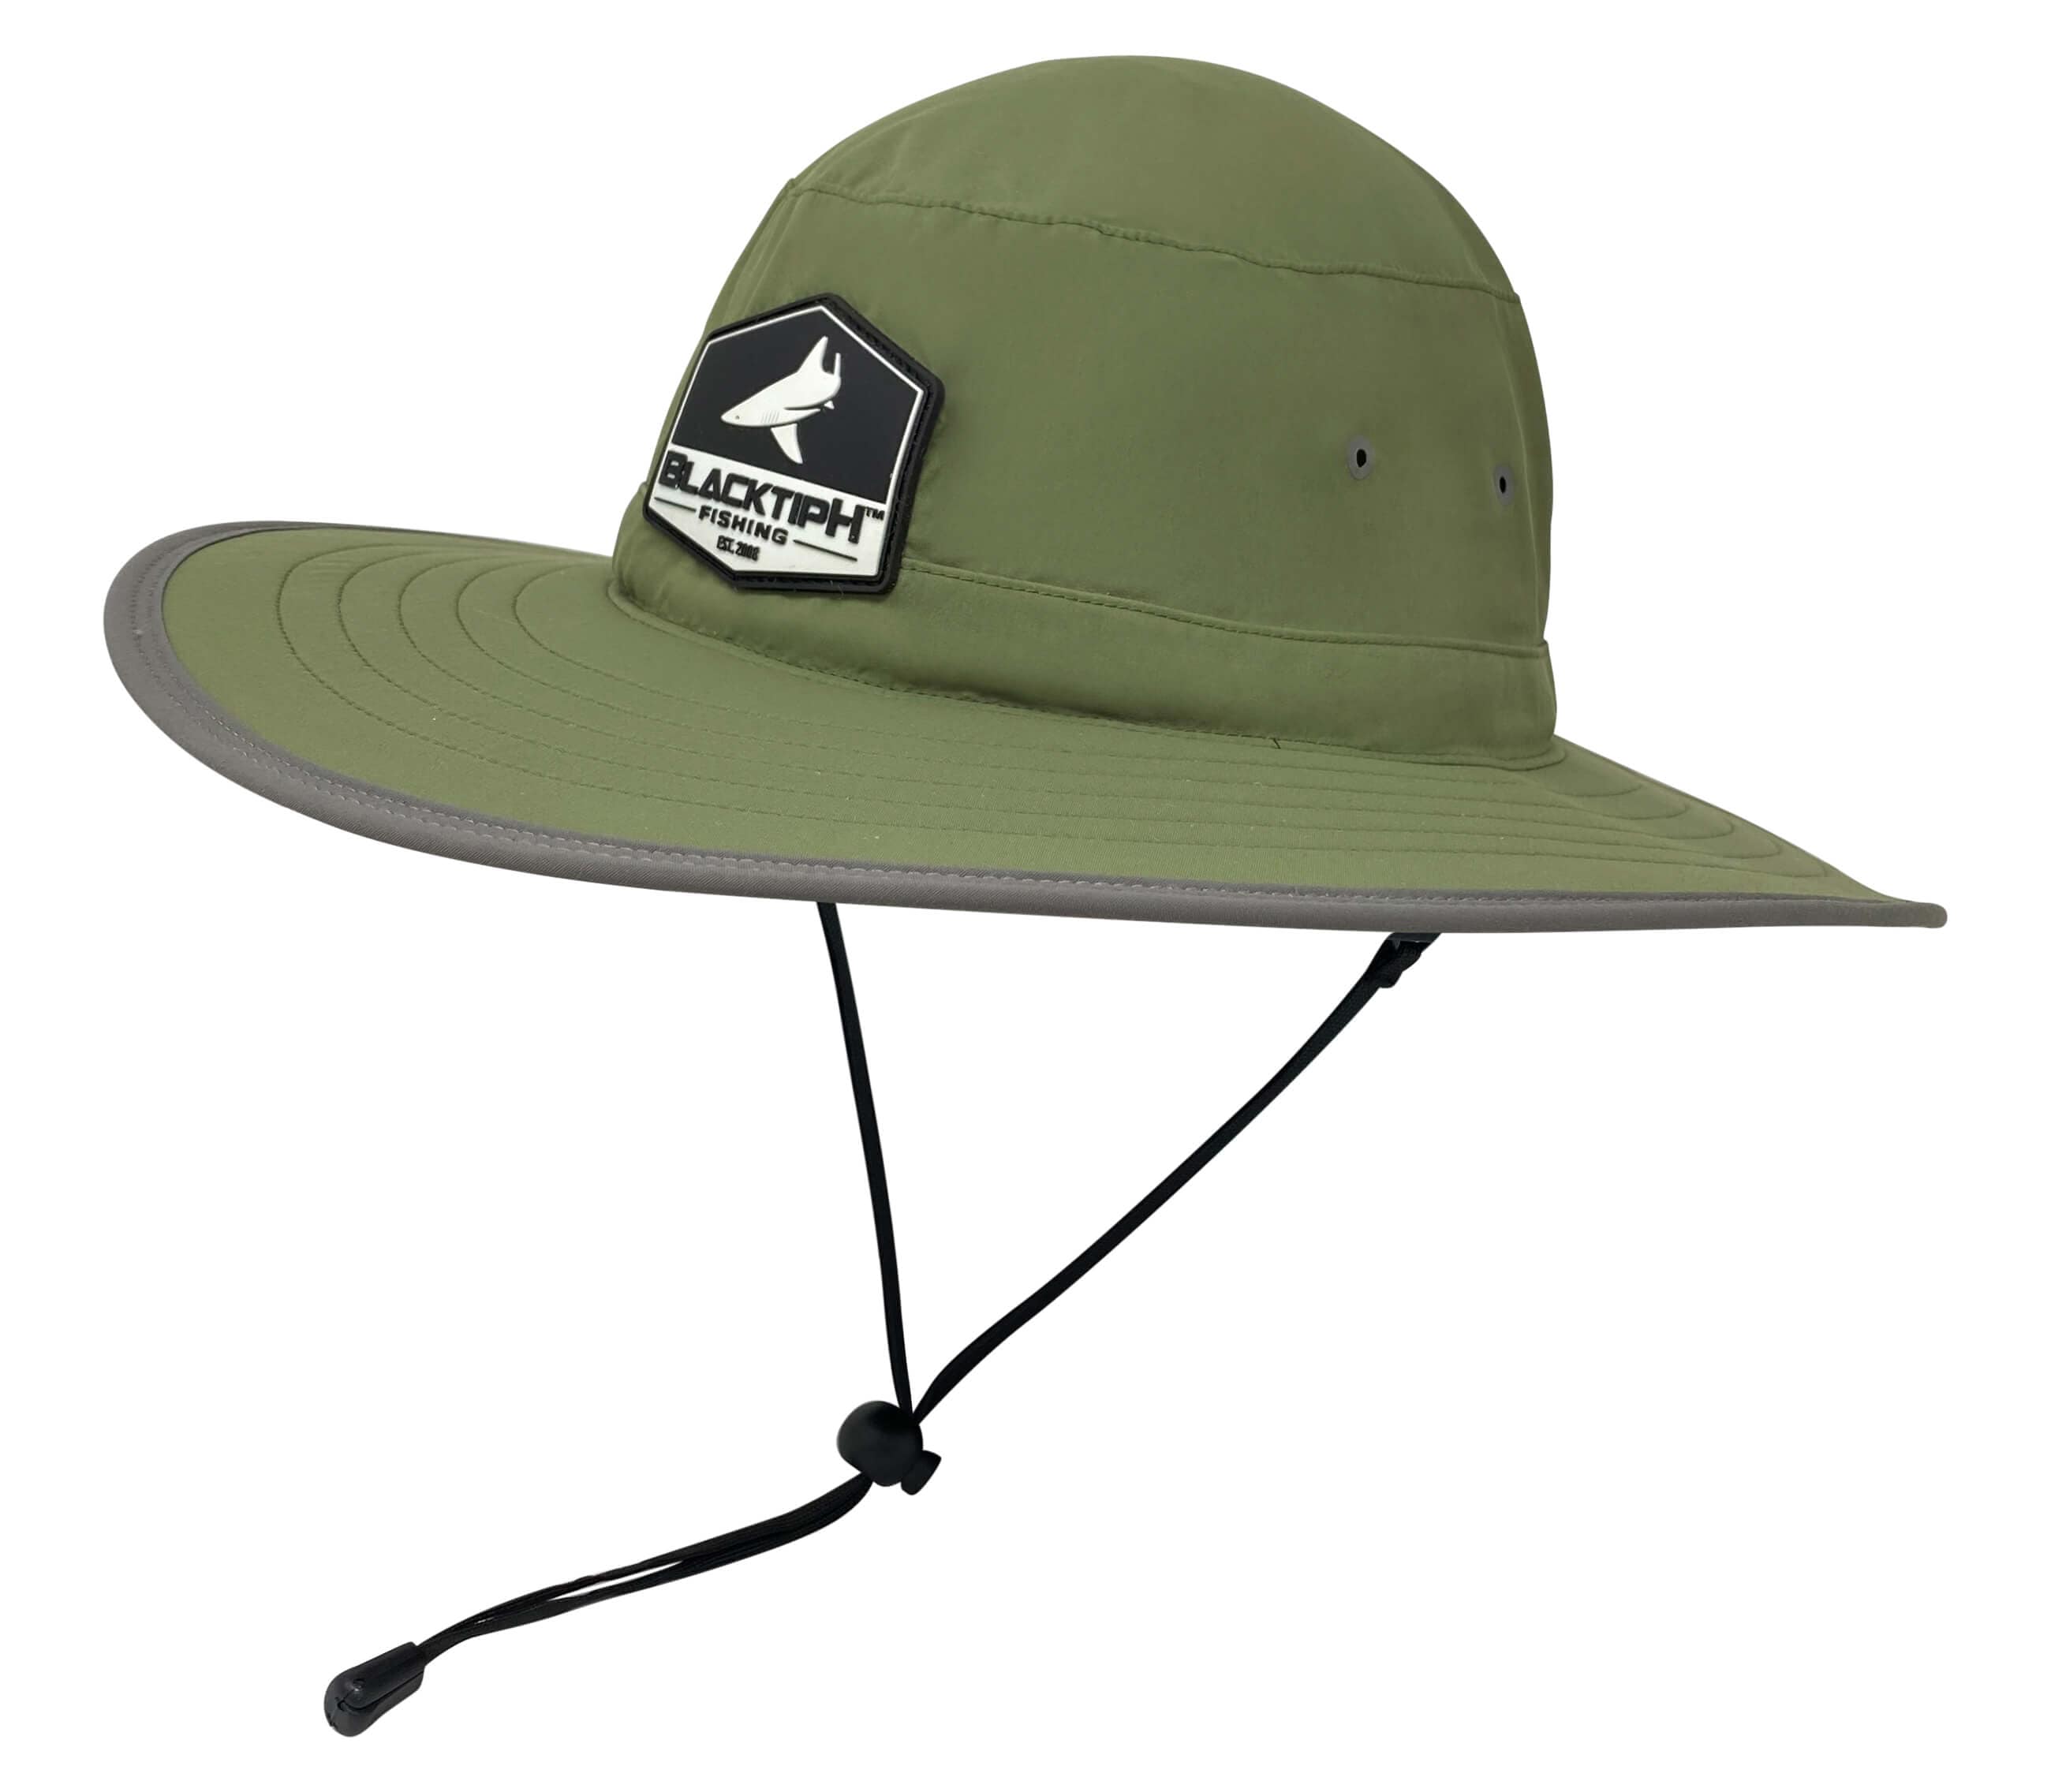 BlacktipH Bucket Fishing Hat in Green with Charcoal Rim | Size Small/Medium